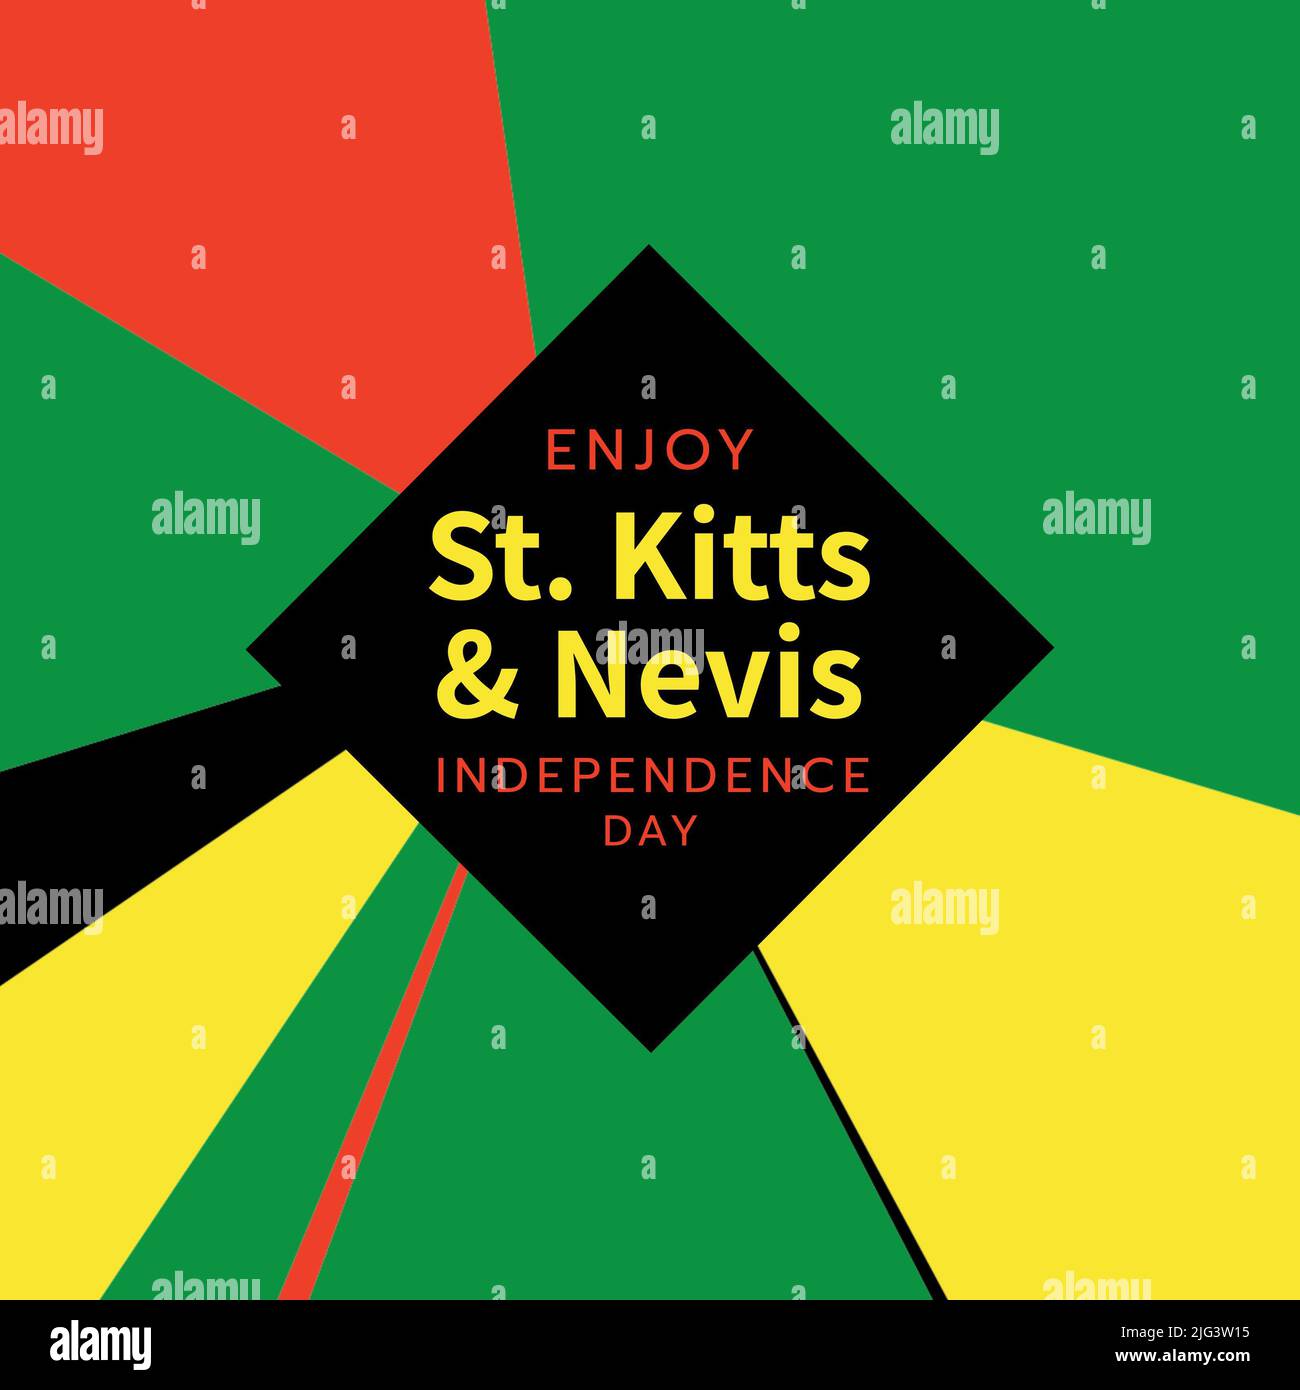 Image of saint kitts and nevis independence day in square and colorful background Stock Photo